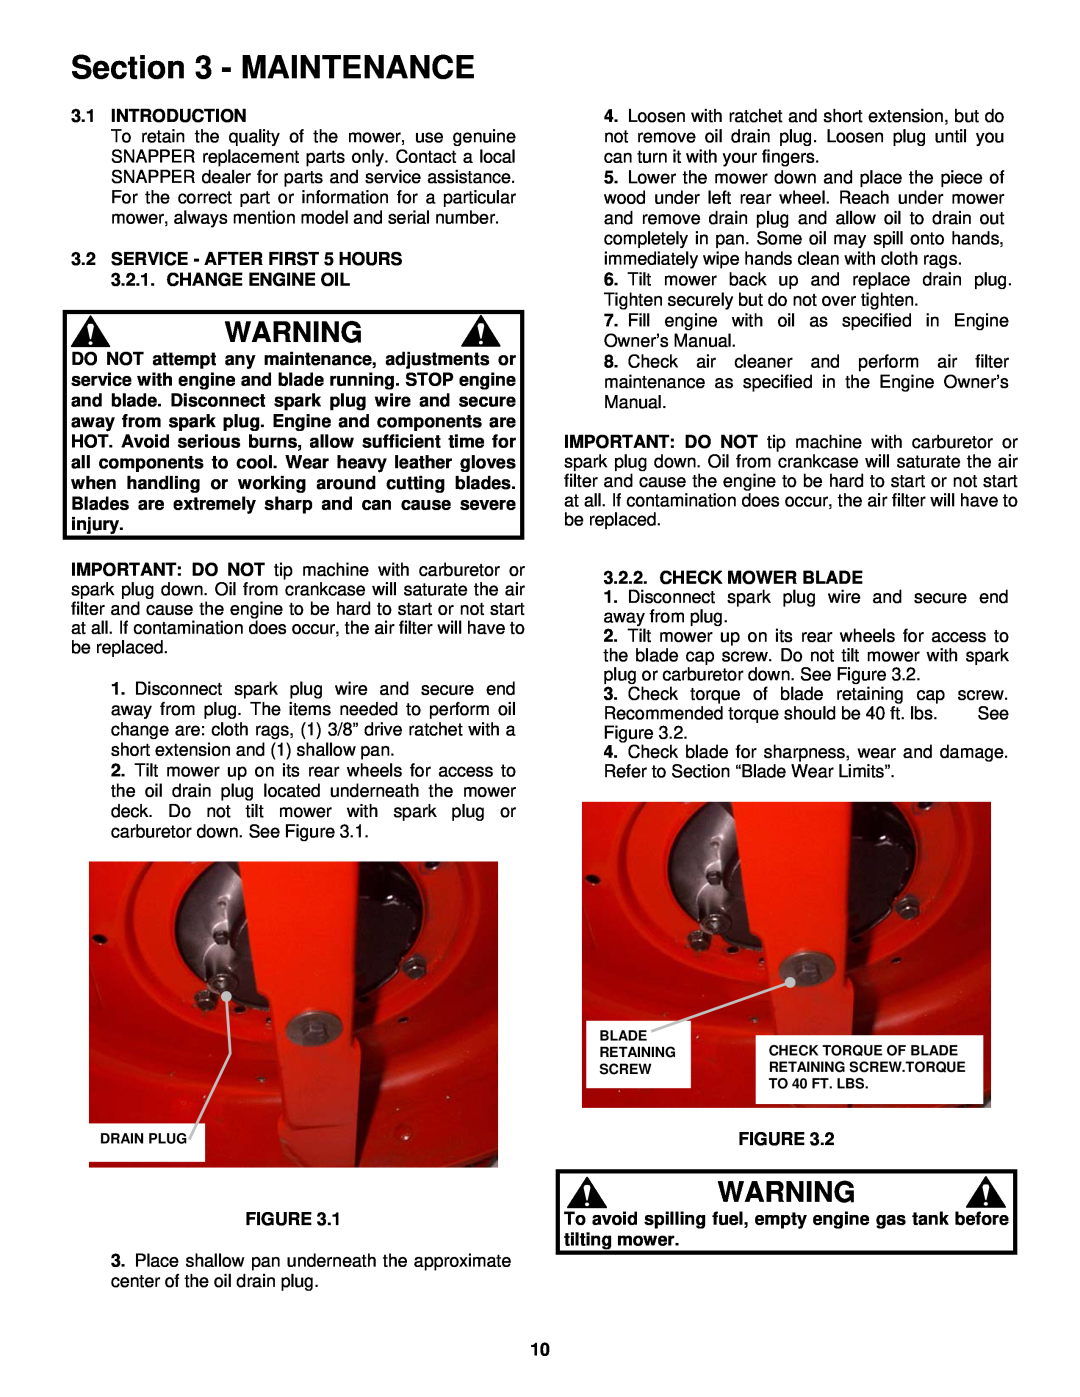 Snapper ER195517B important safety instructions Maintenance, 3.1INTRODUCTION, Check Mower Blade 